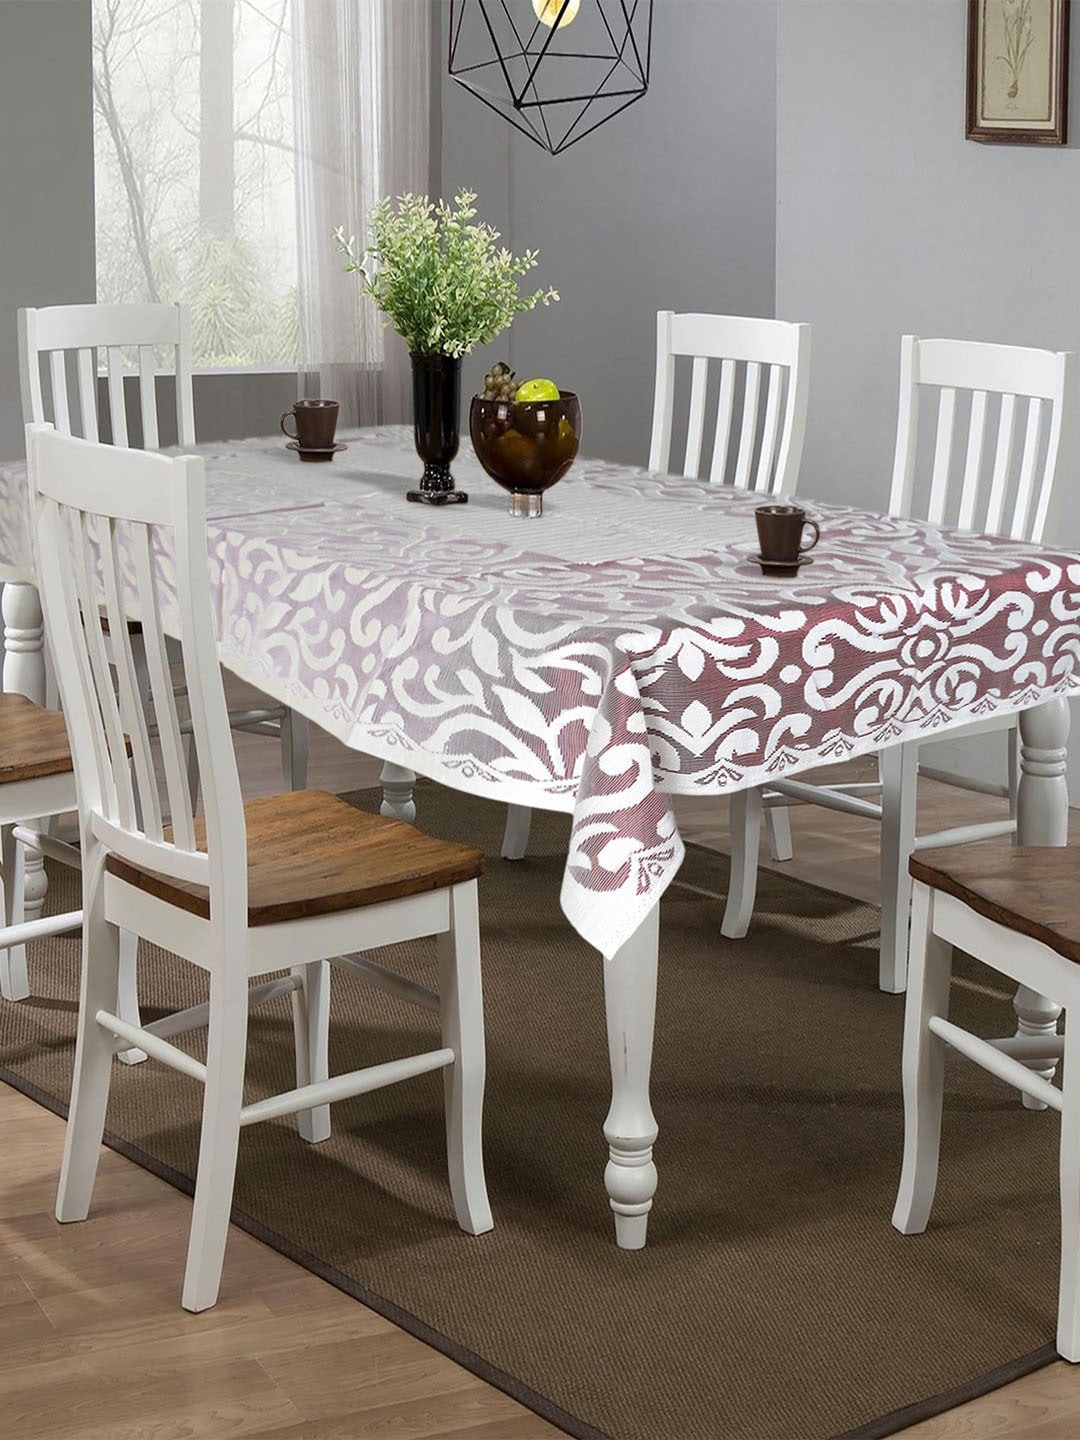 Kuber Industries Maroon & White Printed Cotton 6 Seater Dining Table Cover Price in India